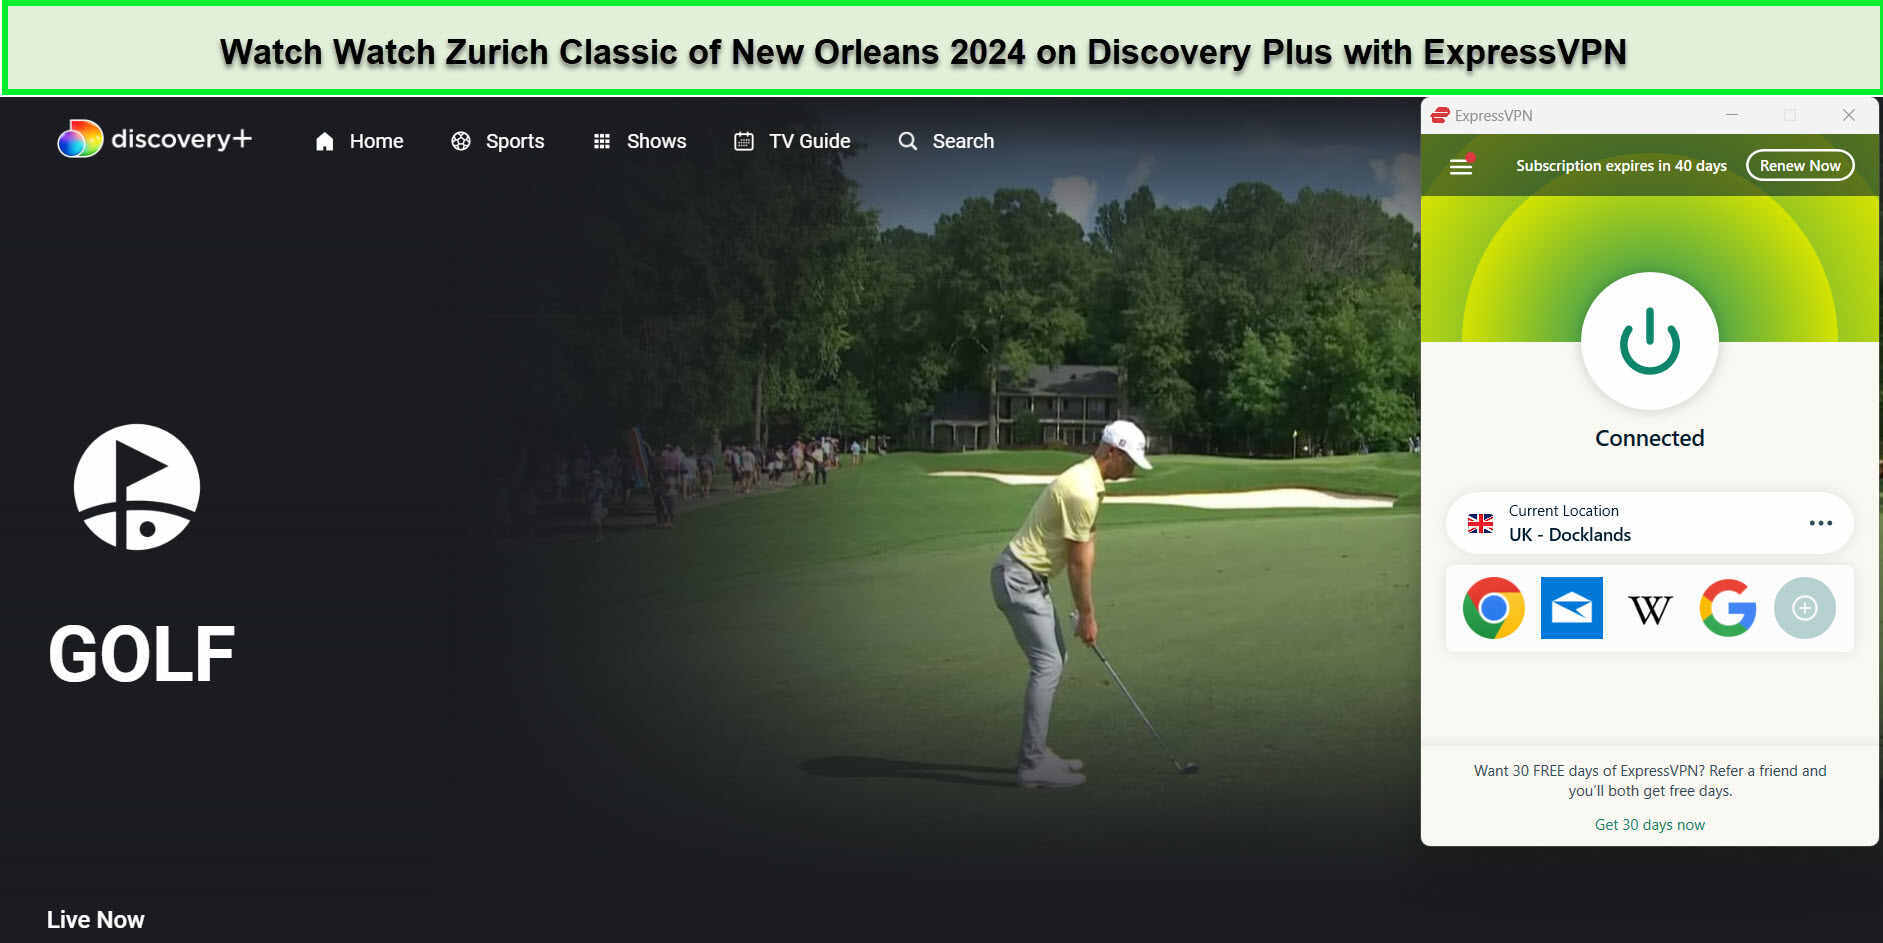 Watch-Zurich-Classic-of-New-Orleans-2024-in-Hong Kong-On-Discovery-Plus-with-ExpressVPN